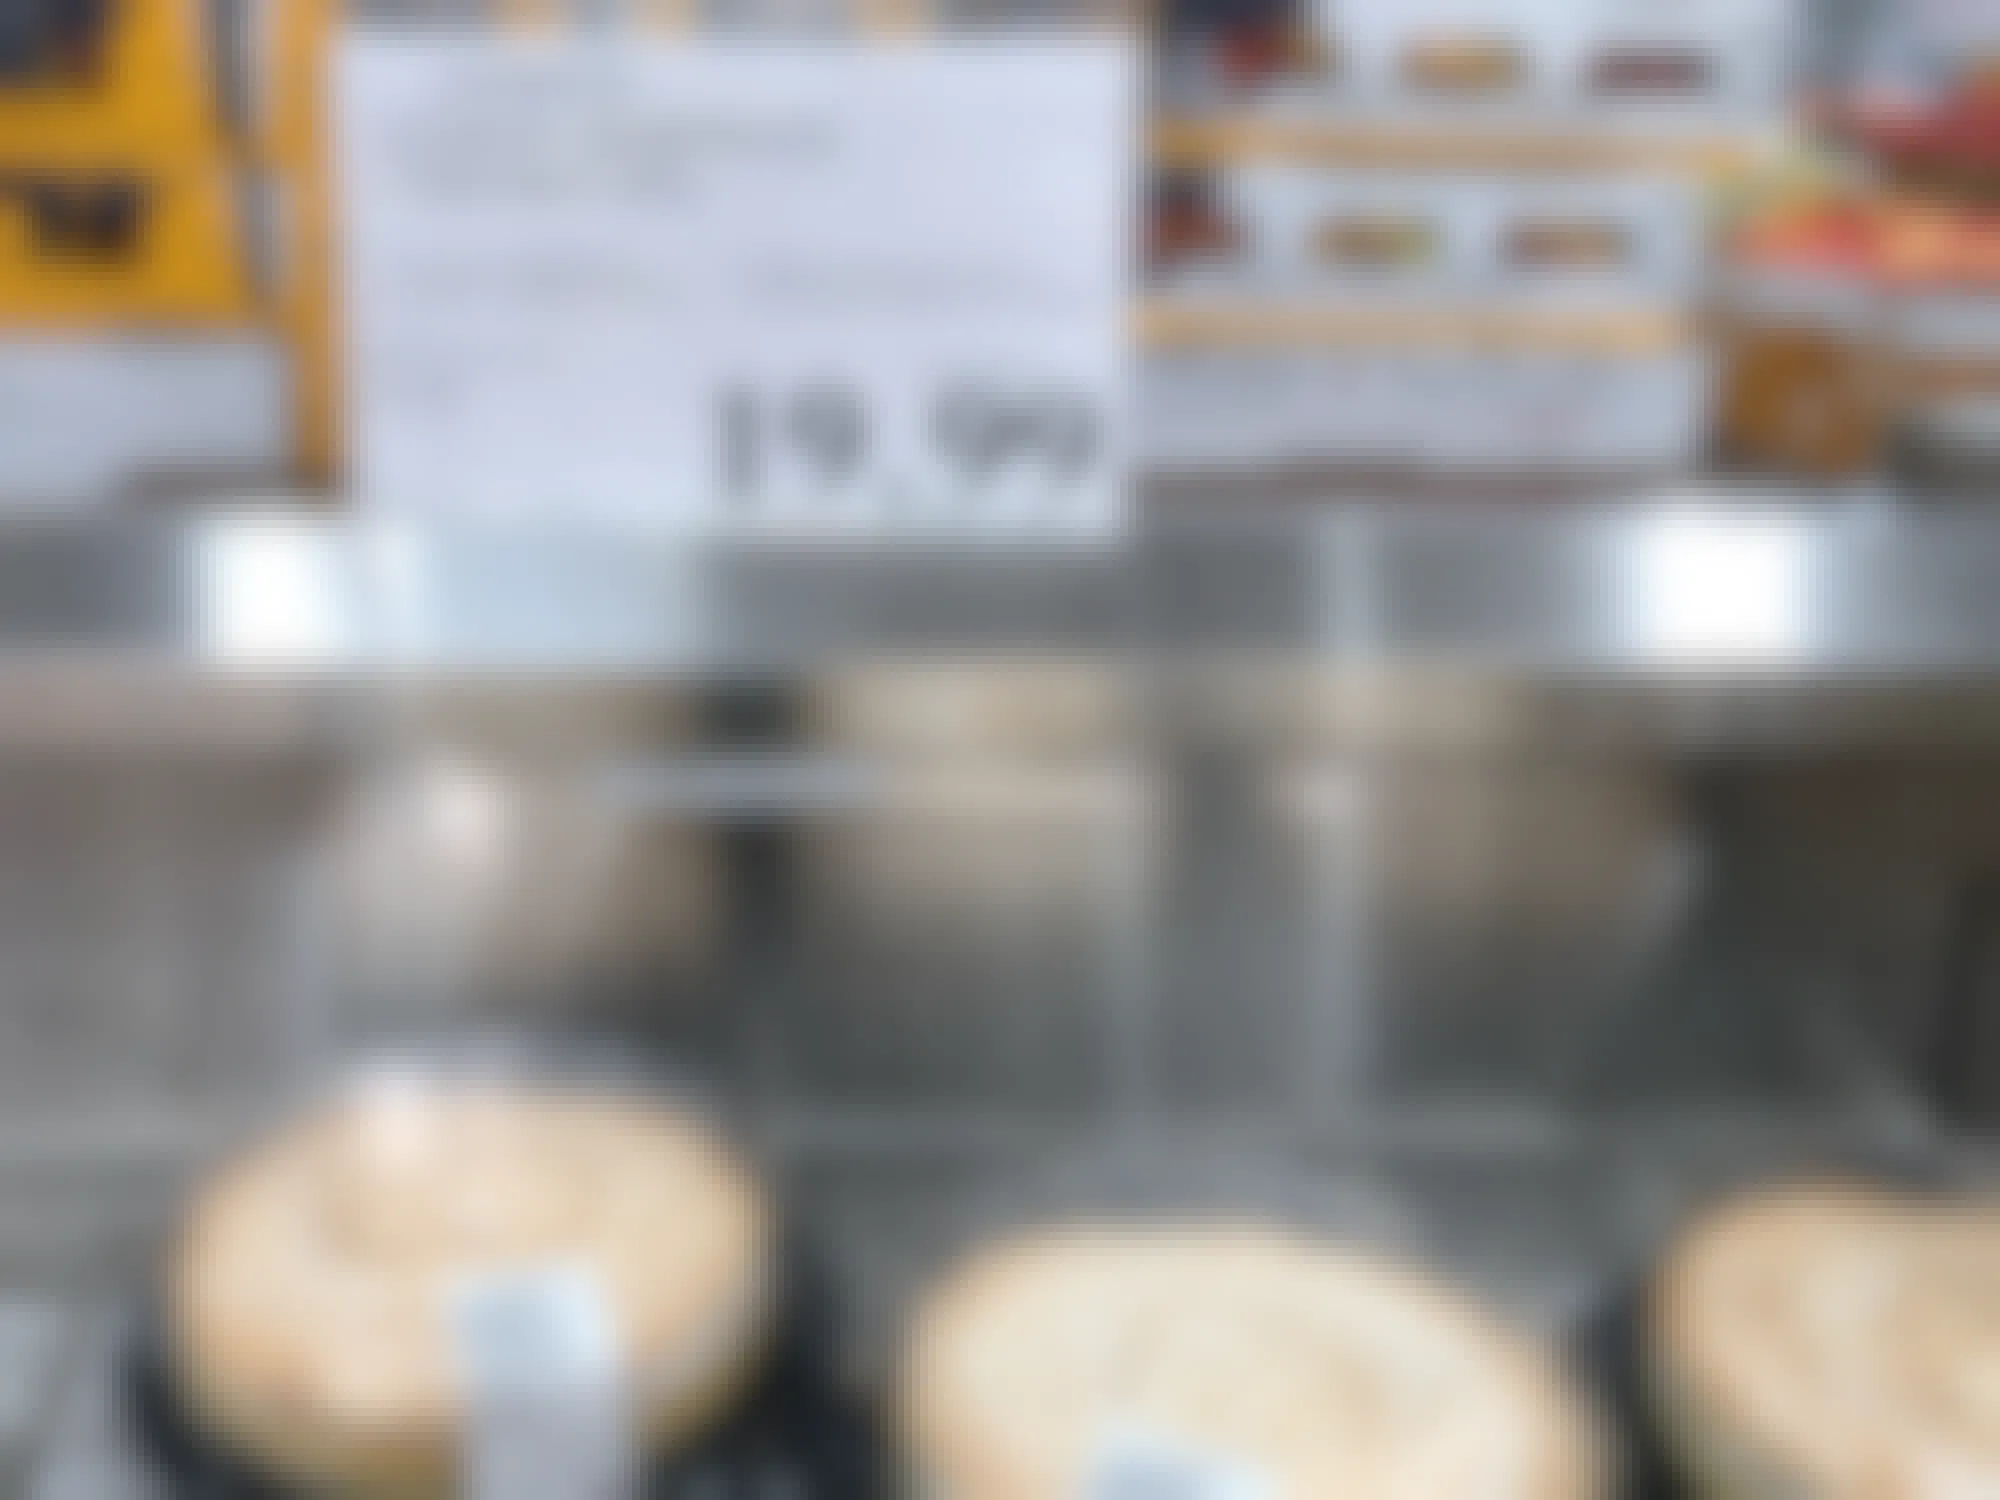 costco lemon meringue cheesecakes in cooler with $19.99 price tag